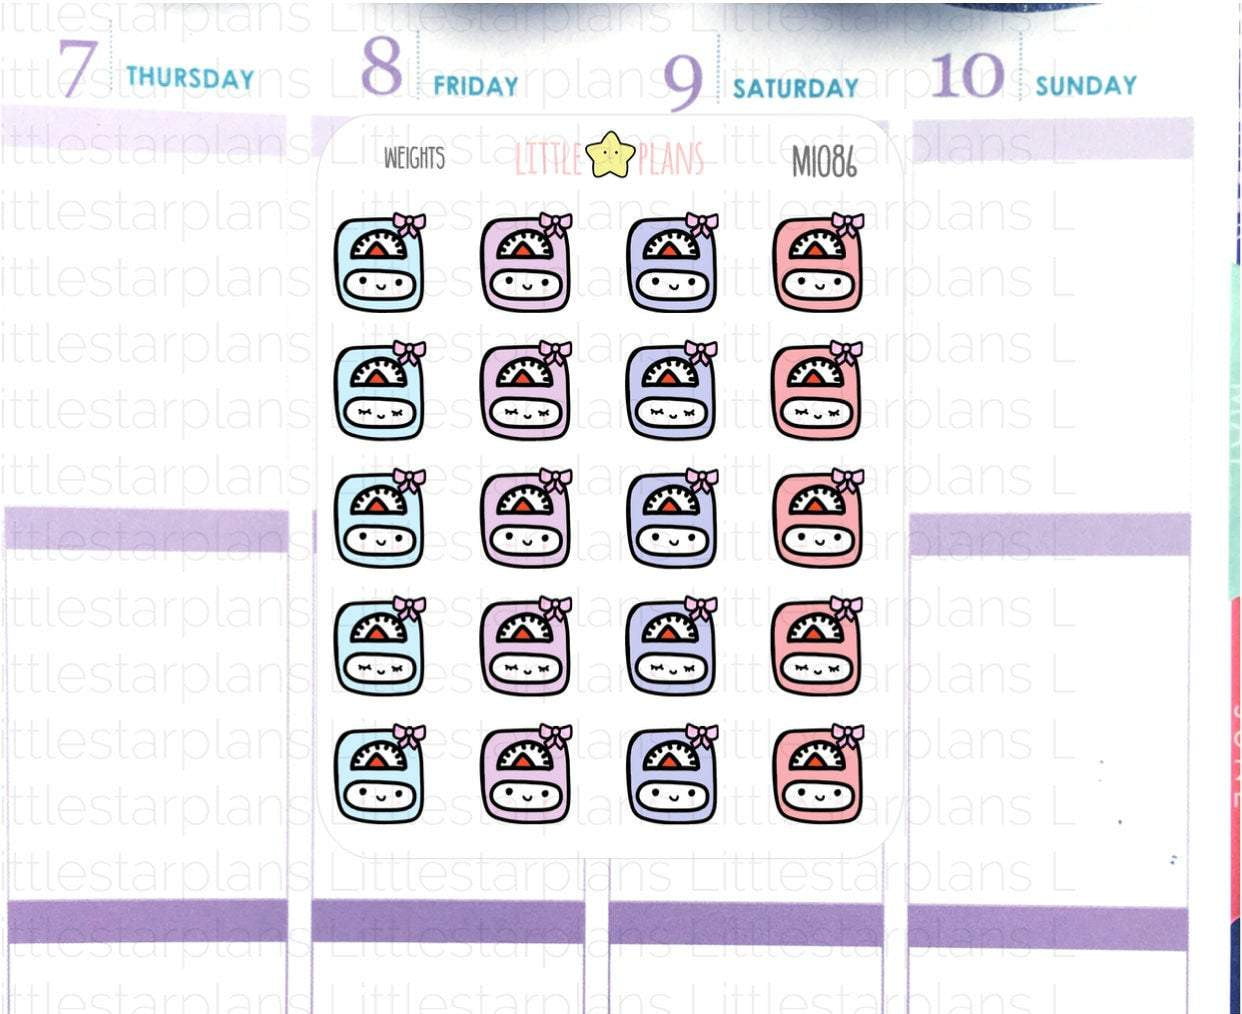 Small Doodle Weights Tracker, Cute Doodle of Weights Planner Stickers 